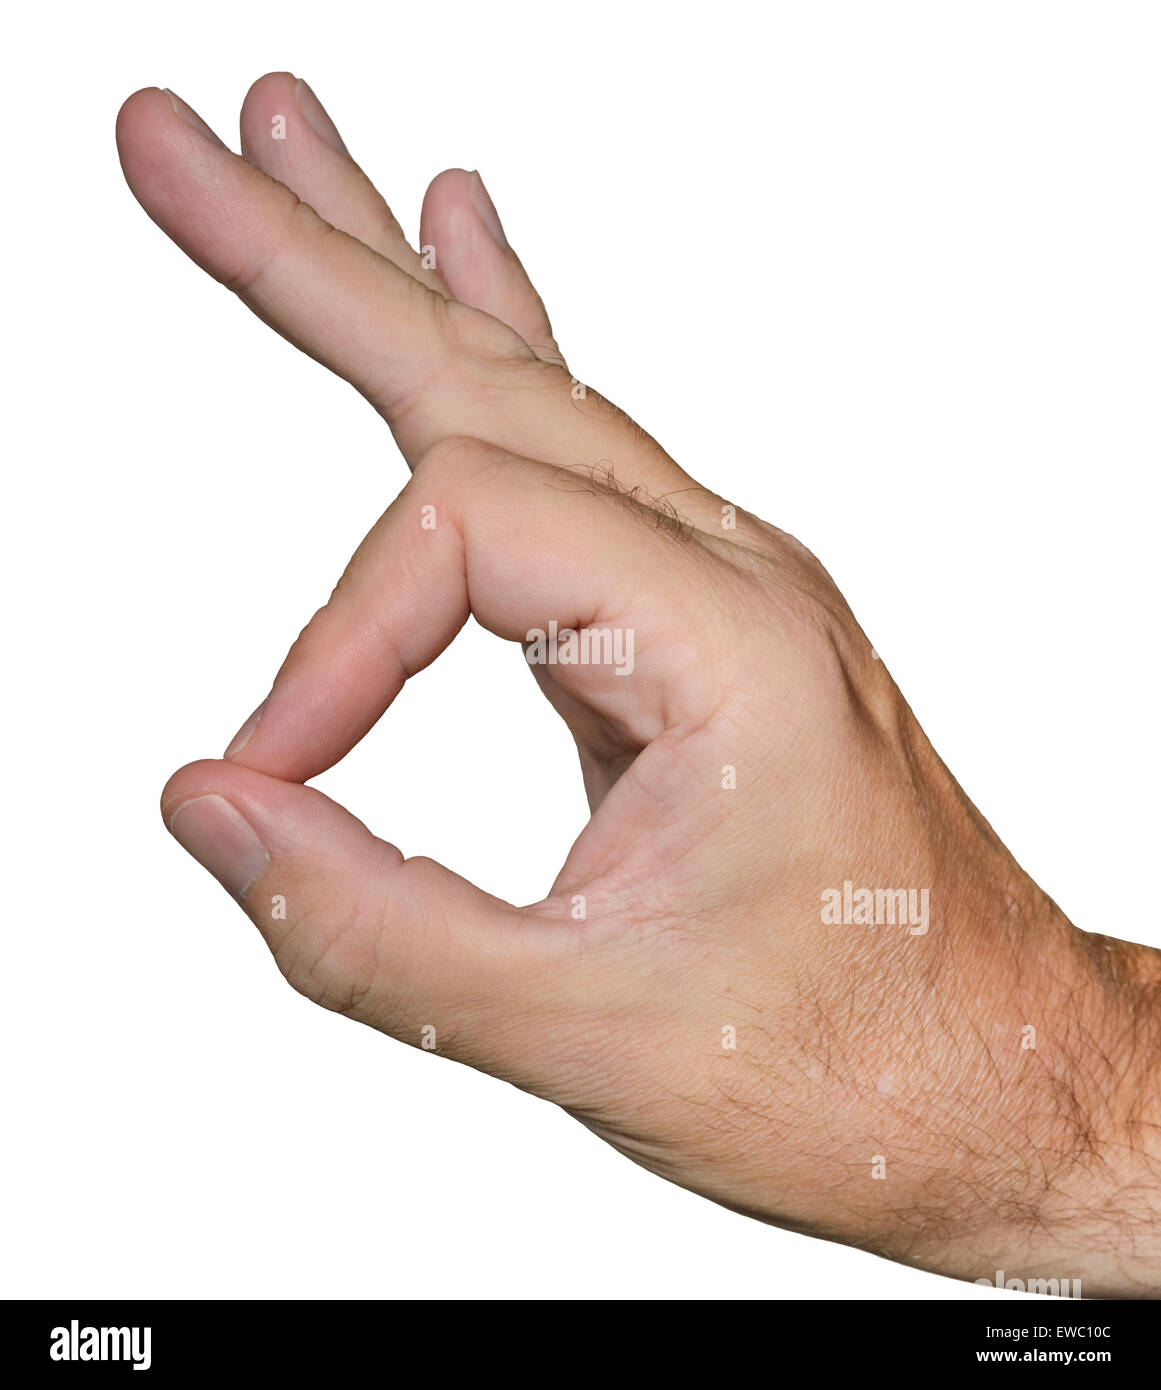 White man doing an OK gesture with his hand, on a white background. Stock Photo